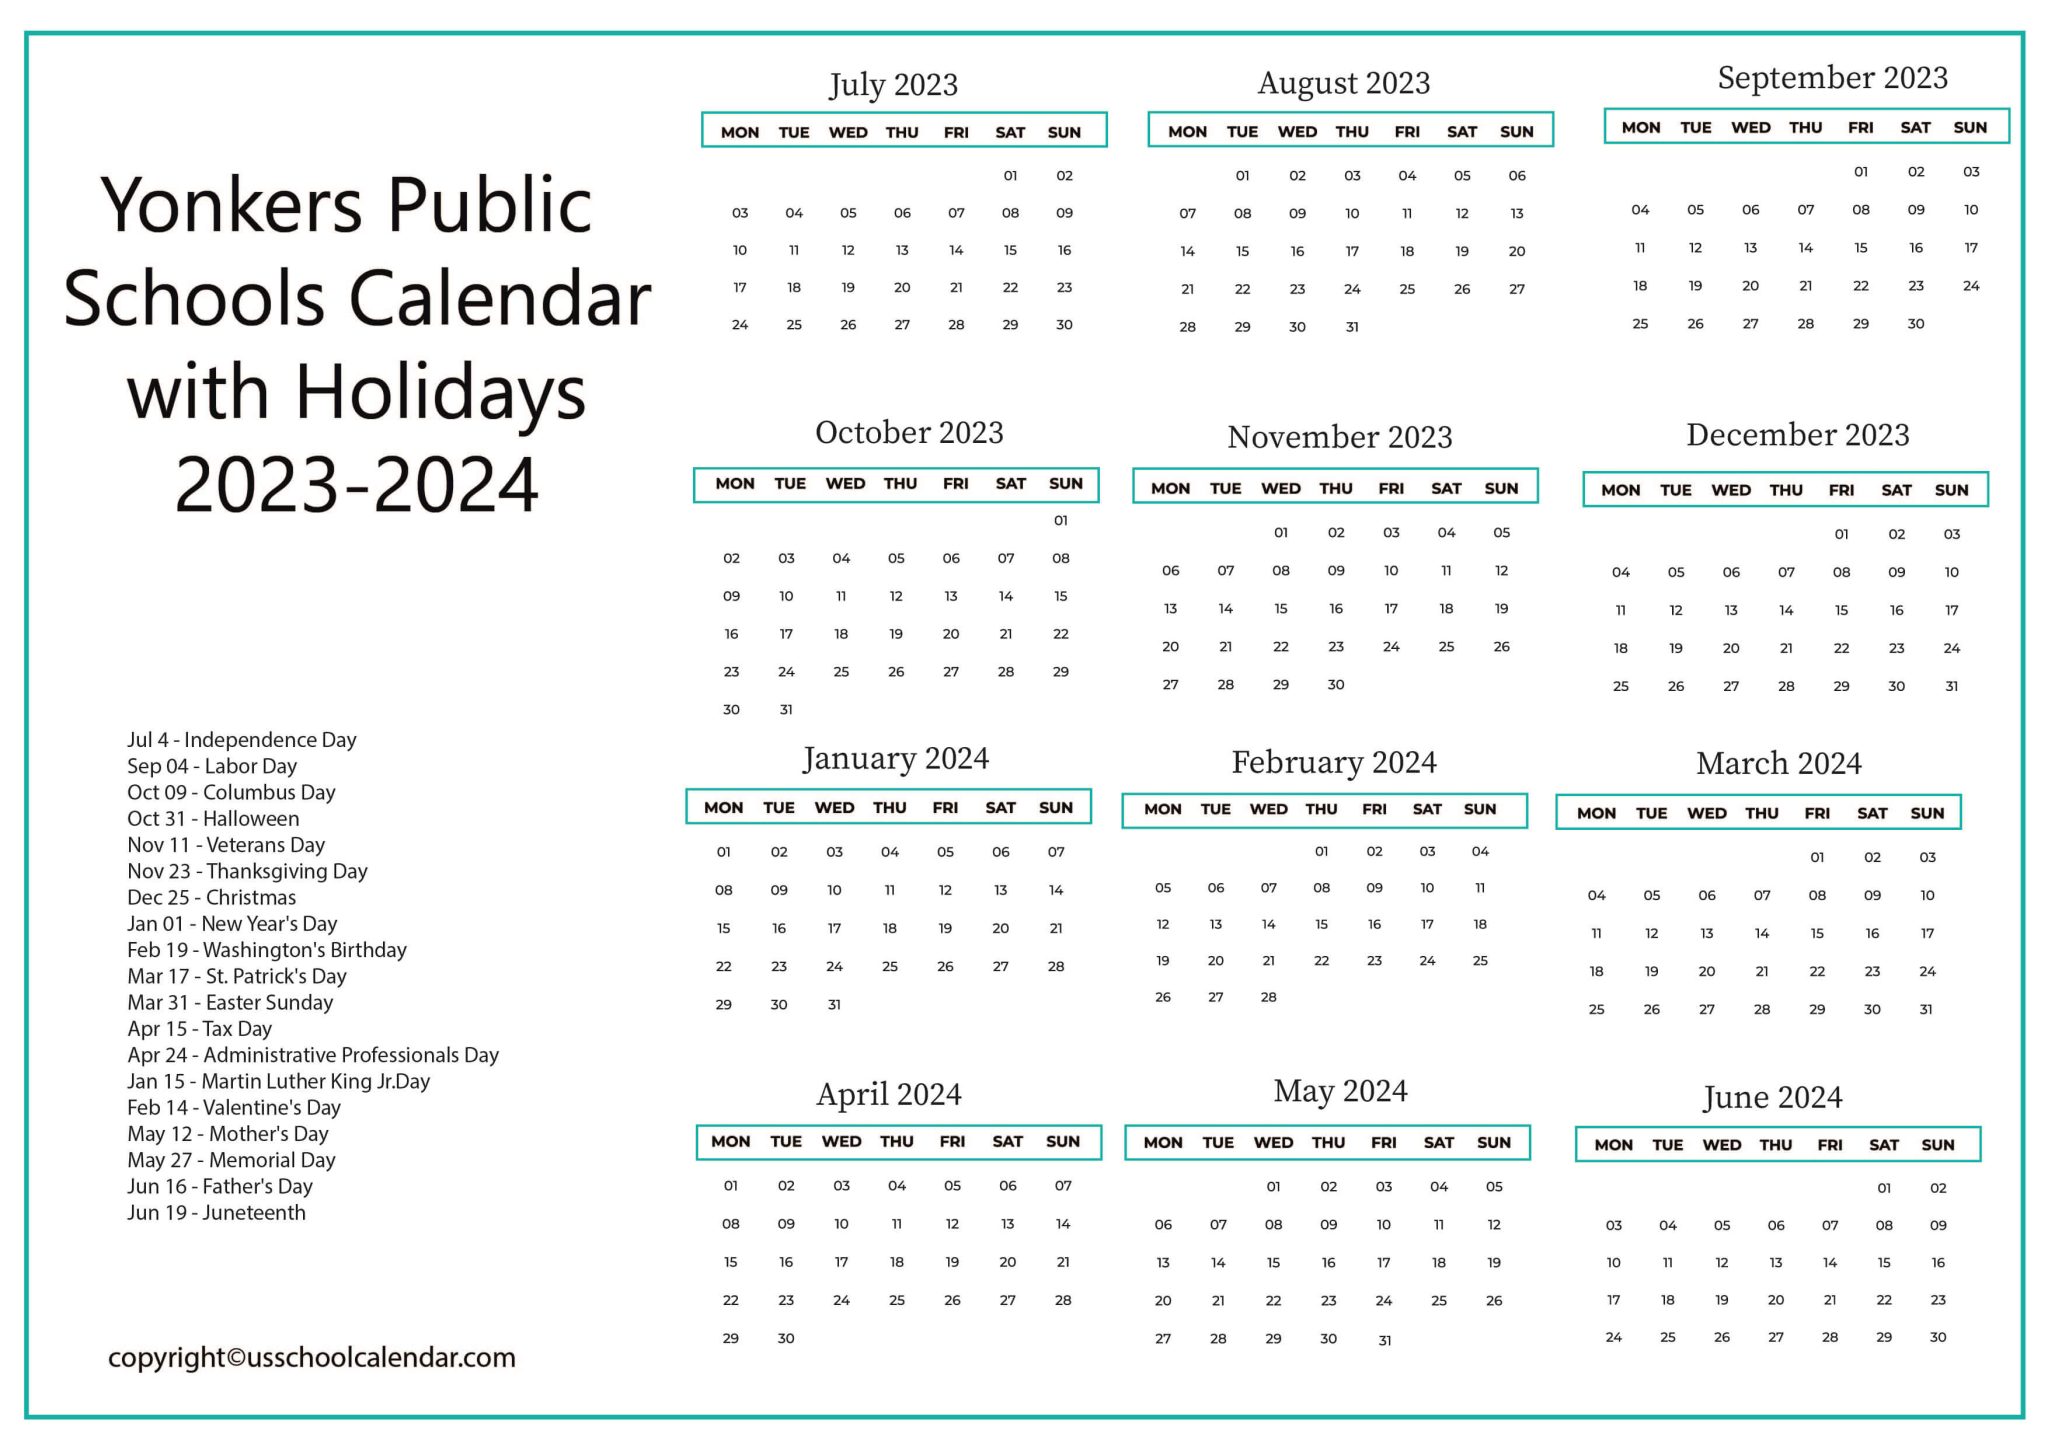 yonkers-public-schools-calendar-with-holidays-2023-2024